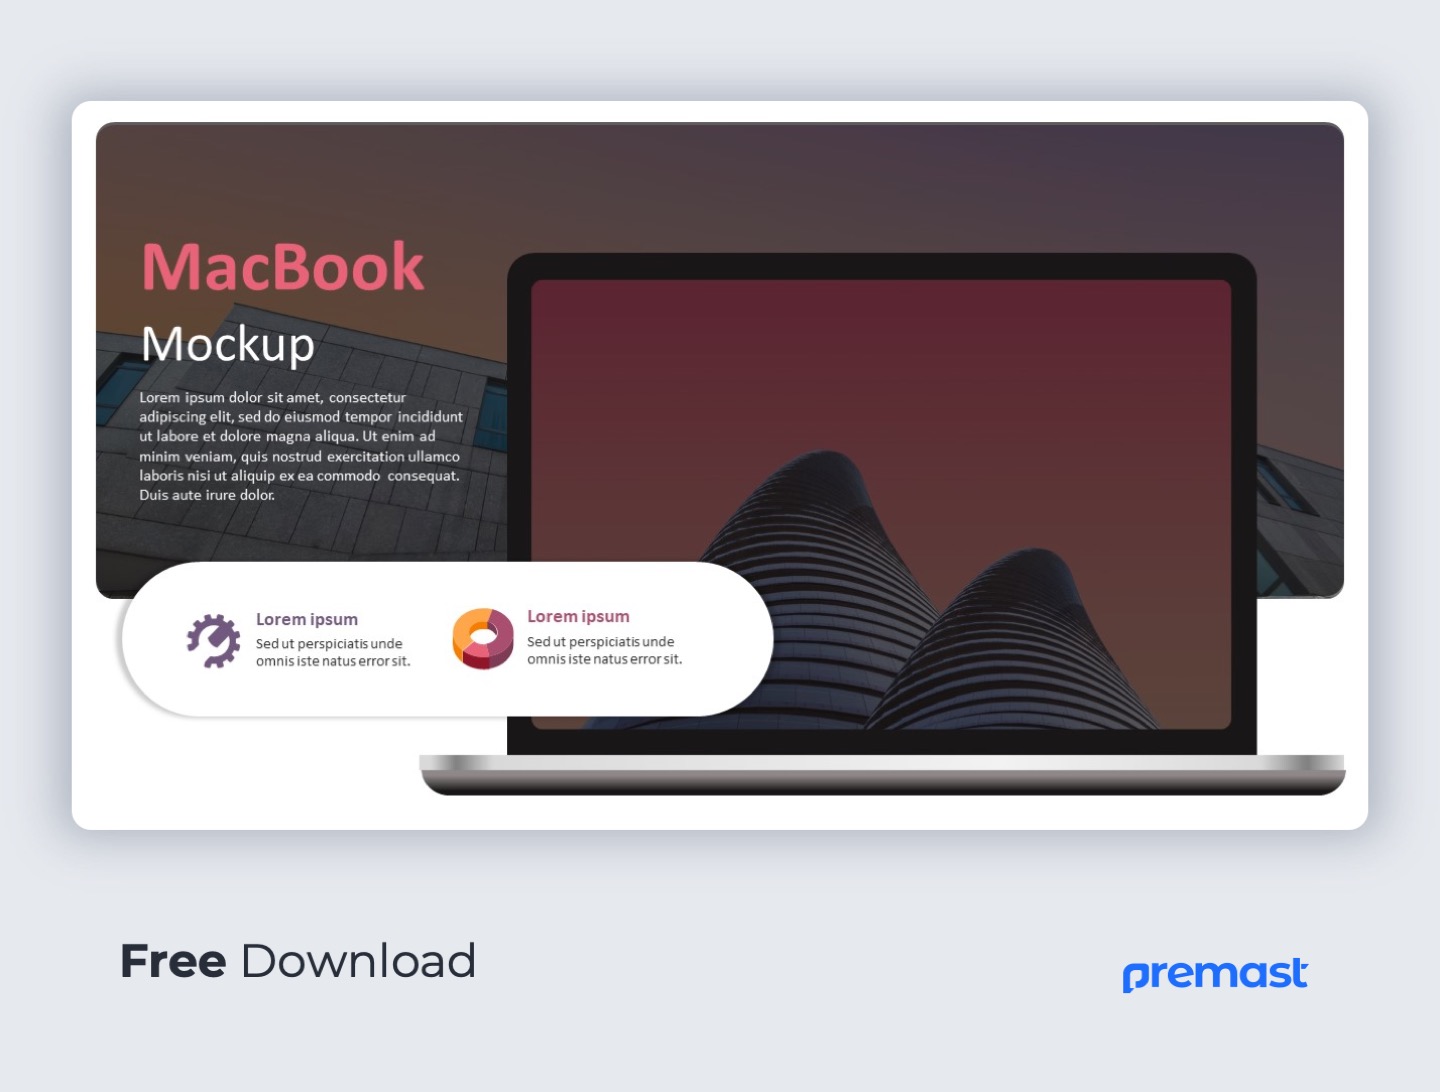 get powerpoint for free on mac